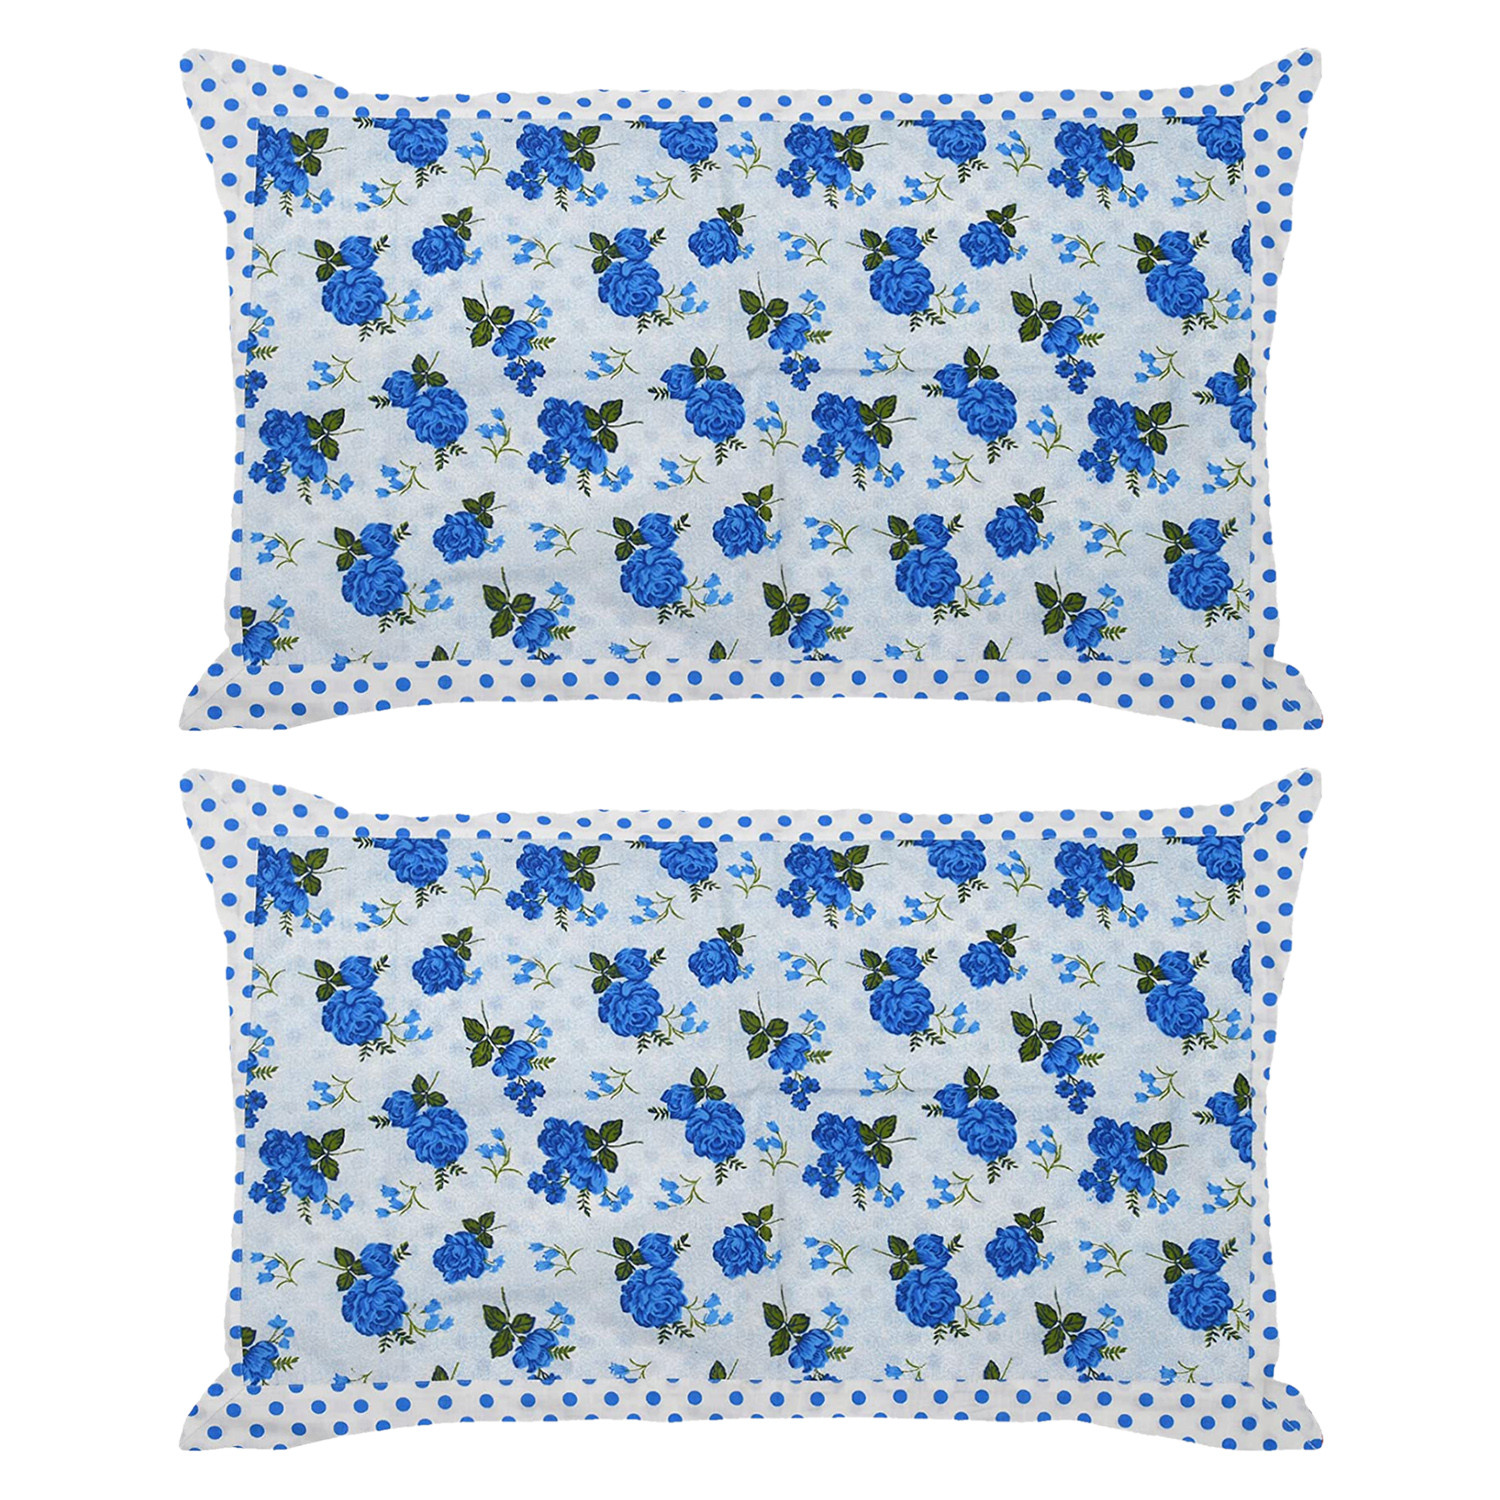 Kuber Industries Dot Print Cotton Pillow Cover- 17x27 Inch,(Blue)